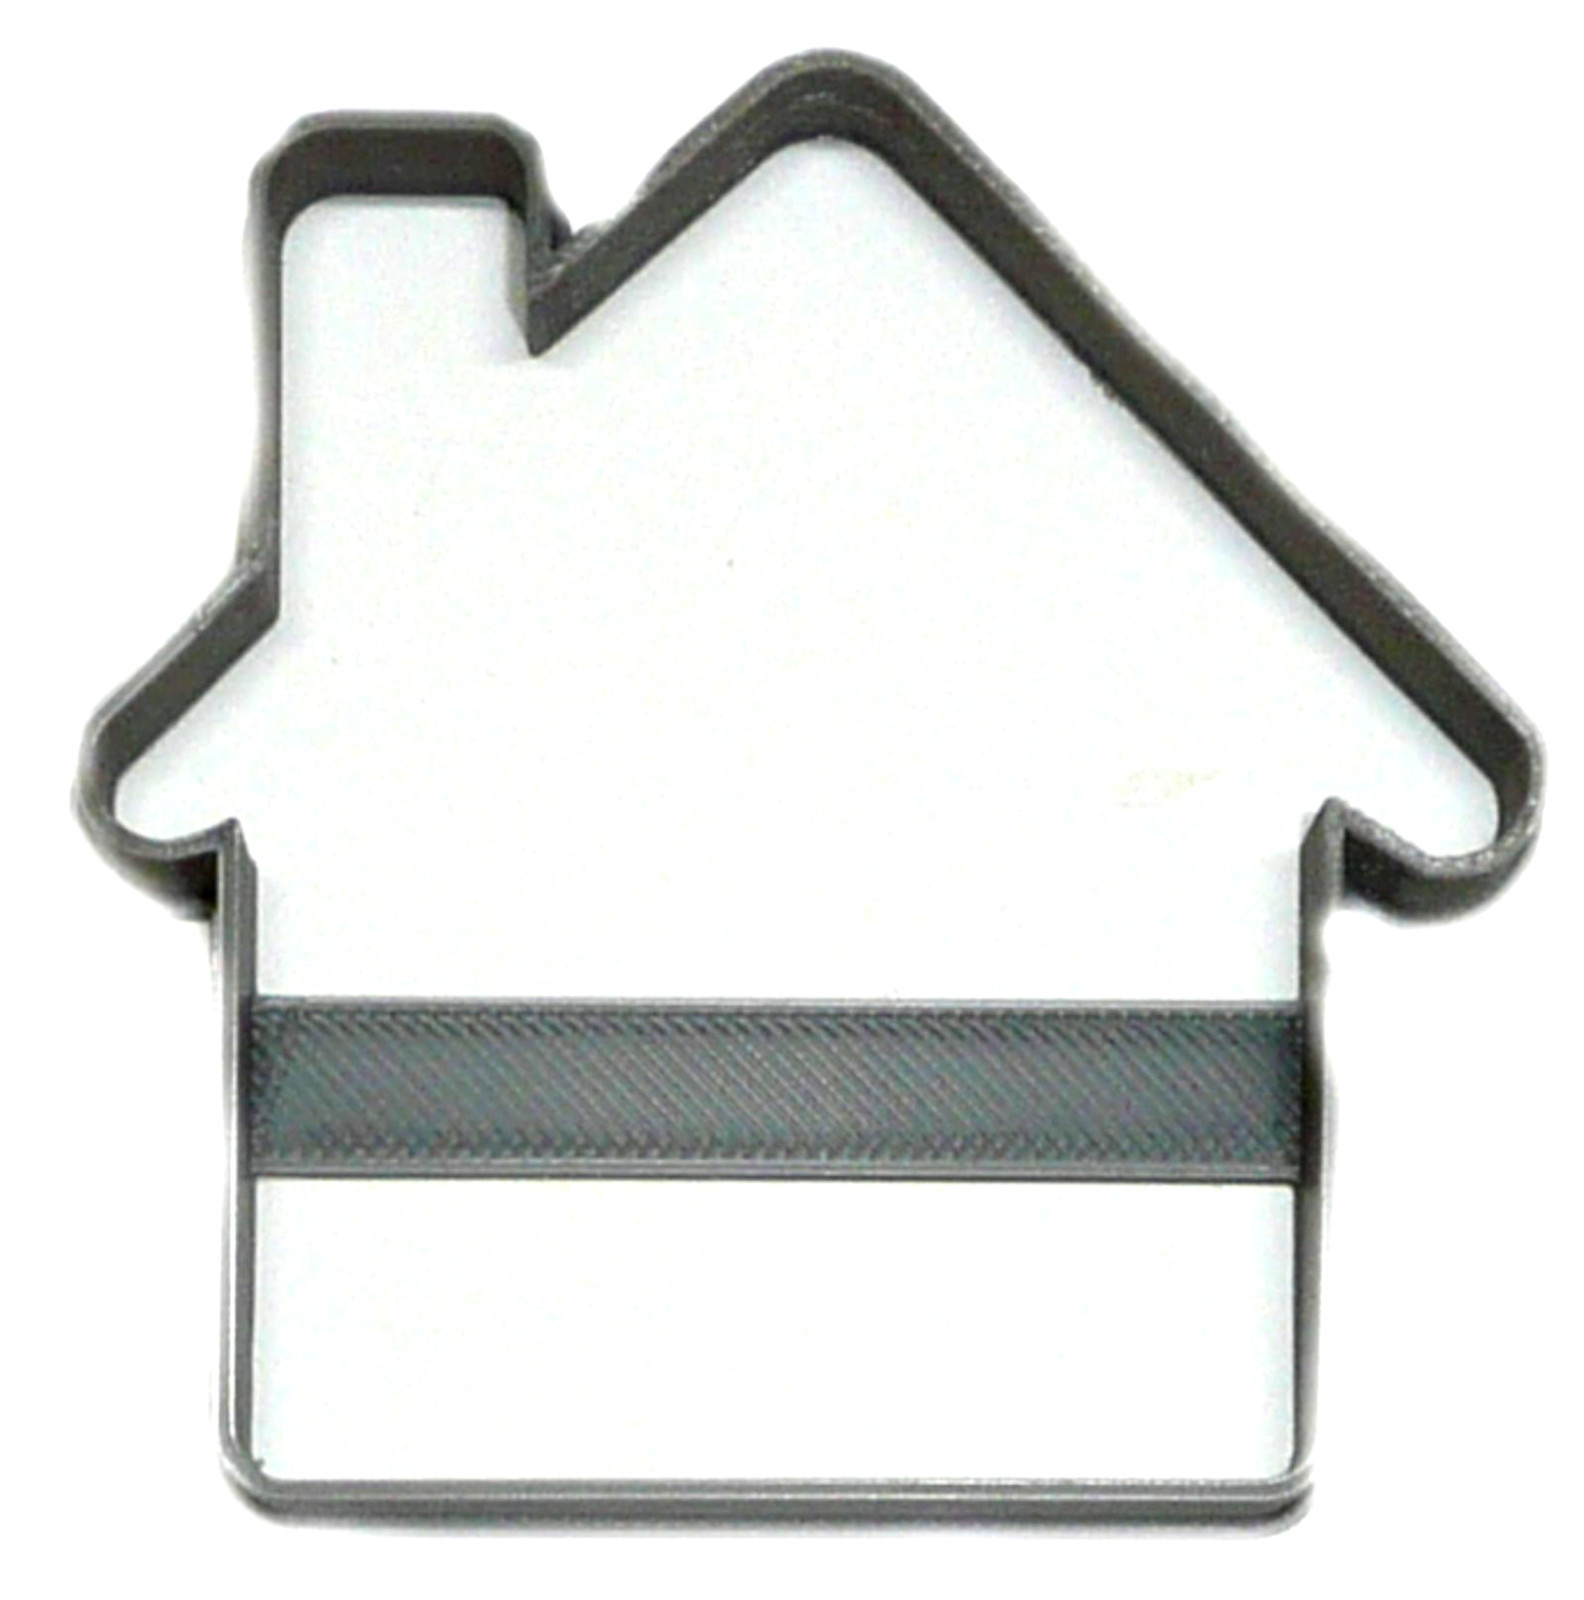 House Outline New Home Real Estate Construction Cookie Cutter USA PR2708